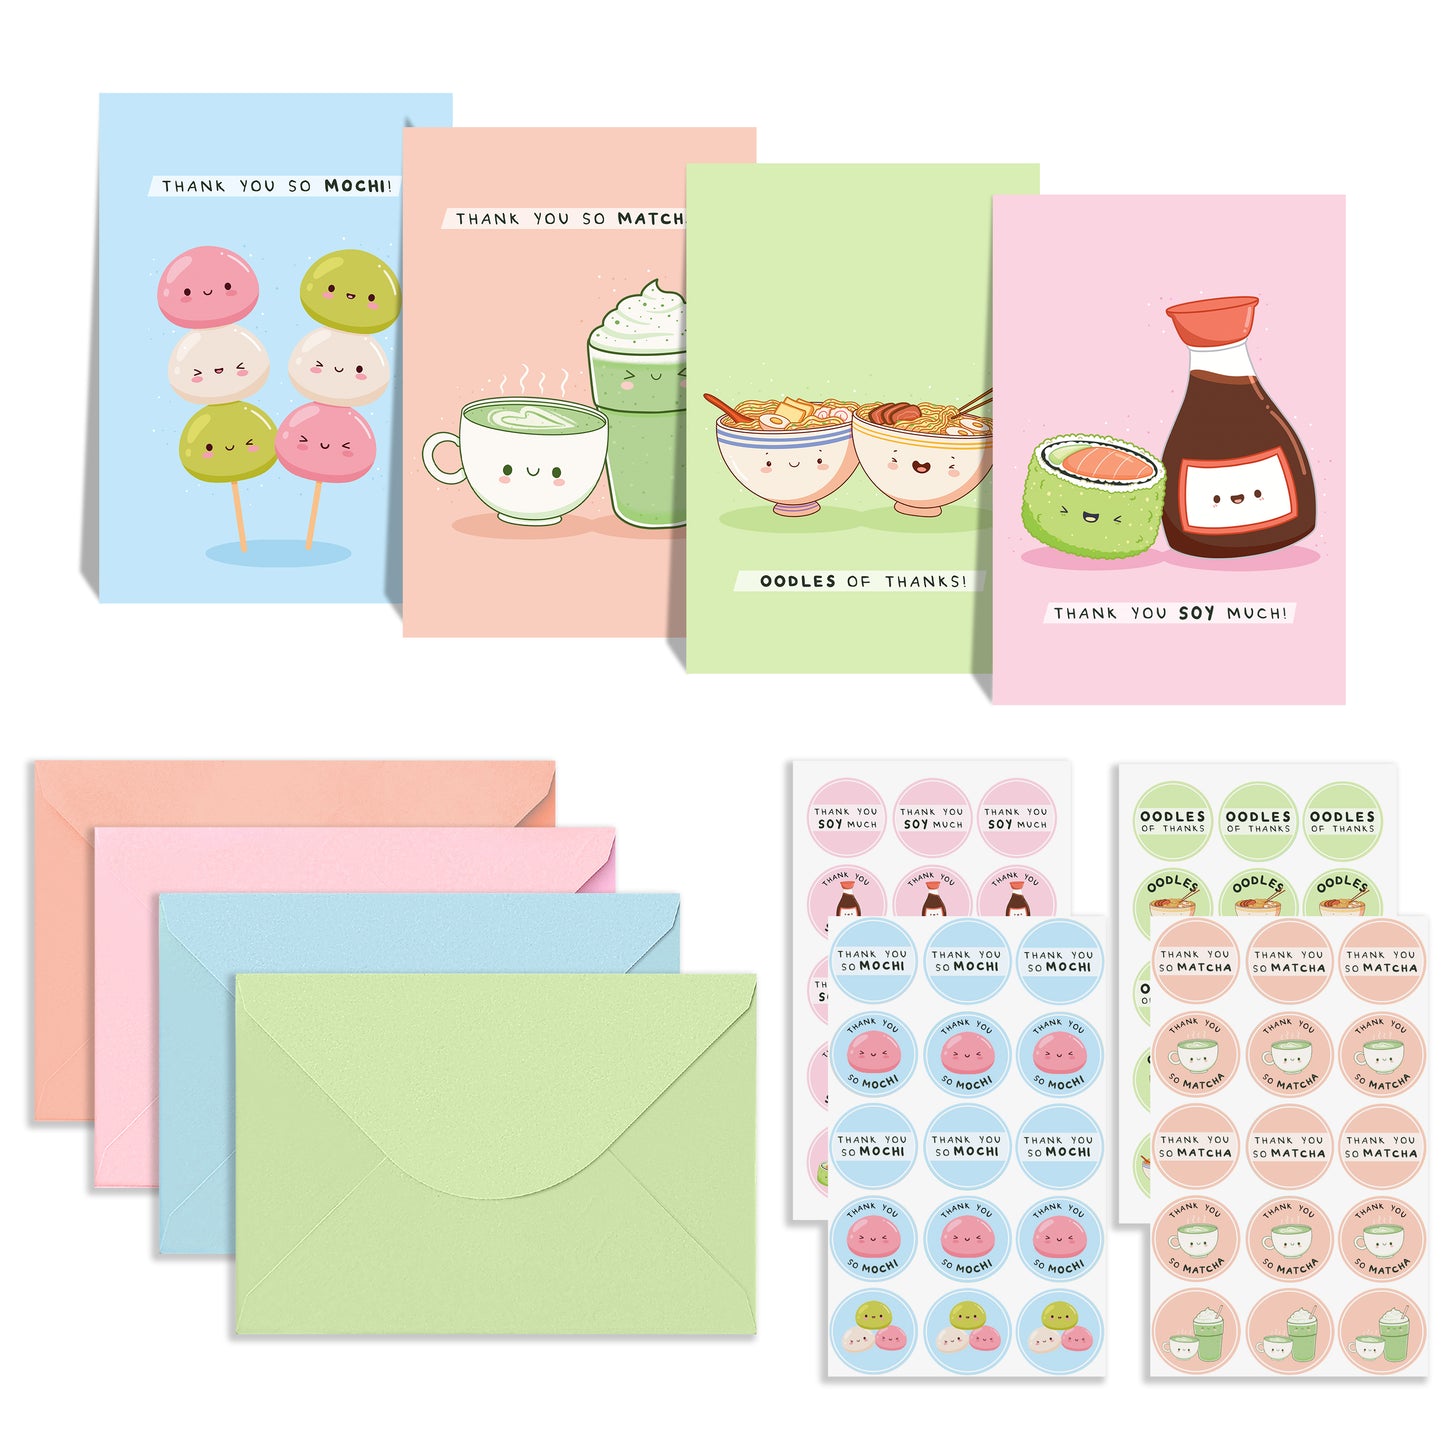 Thank You Cards Multipack - Cute Kawaii Cards - Pack of 48 cards 4 designs